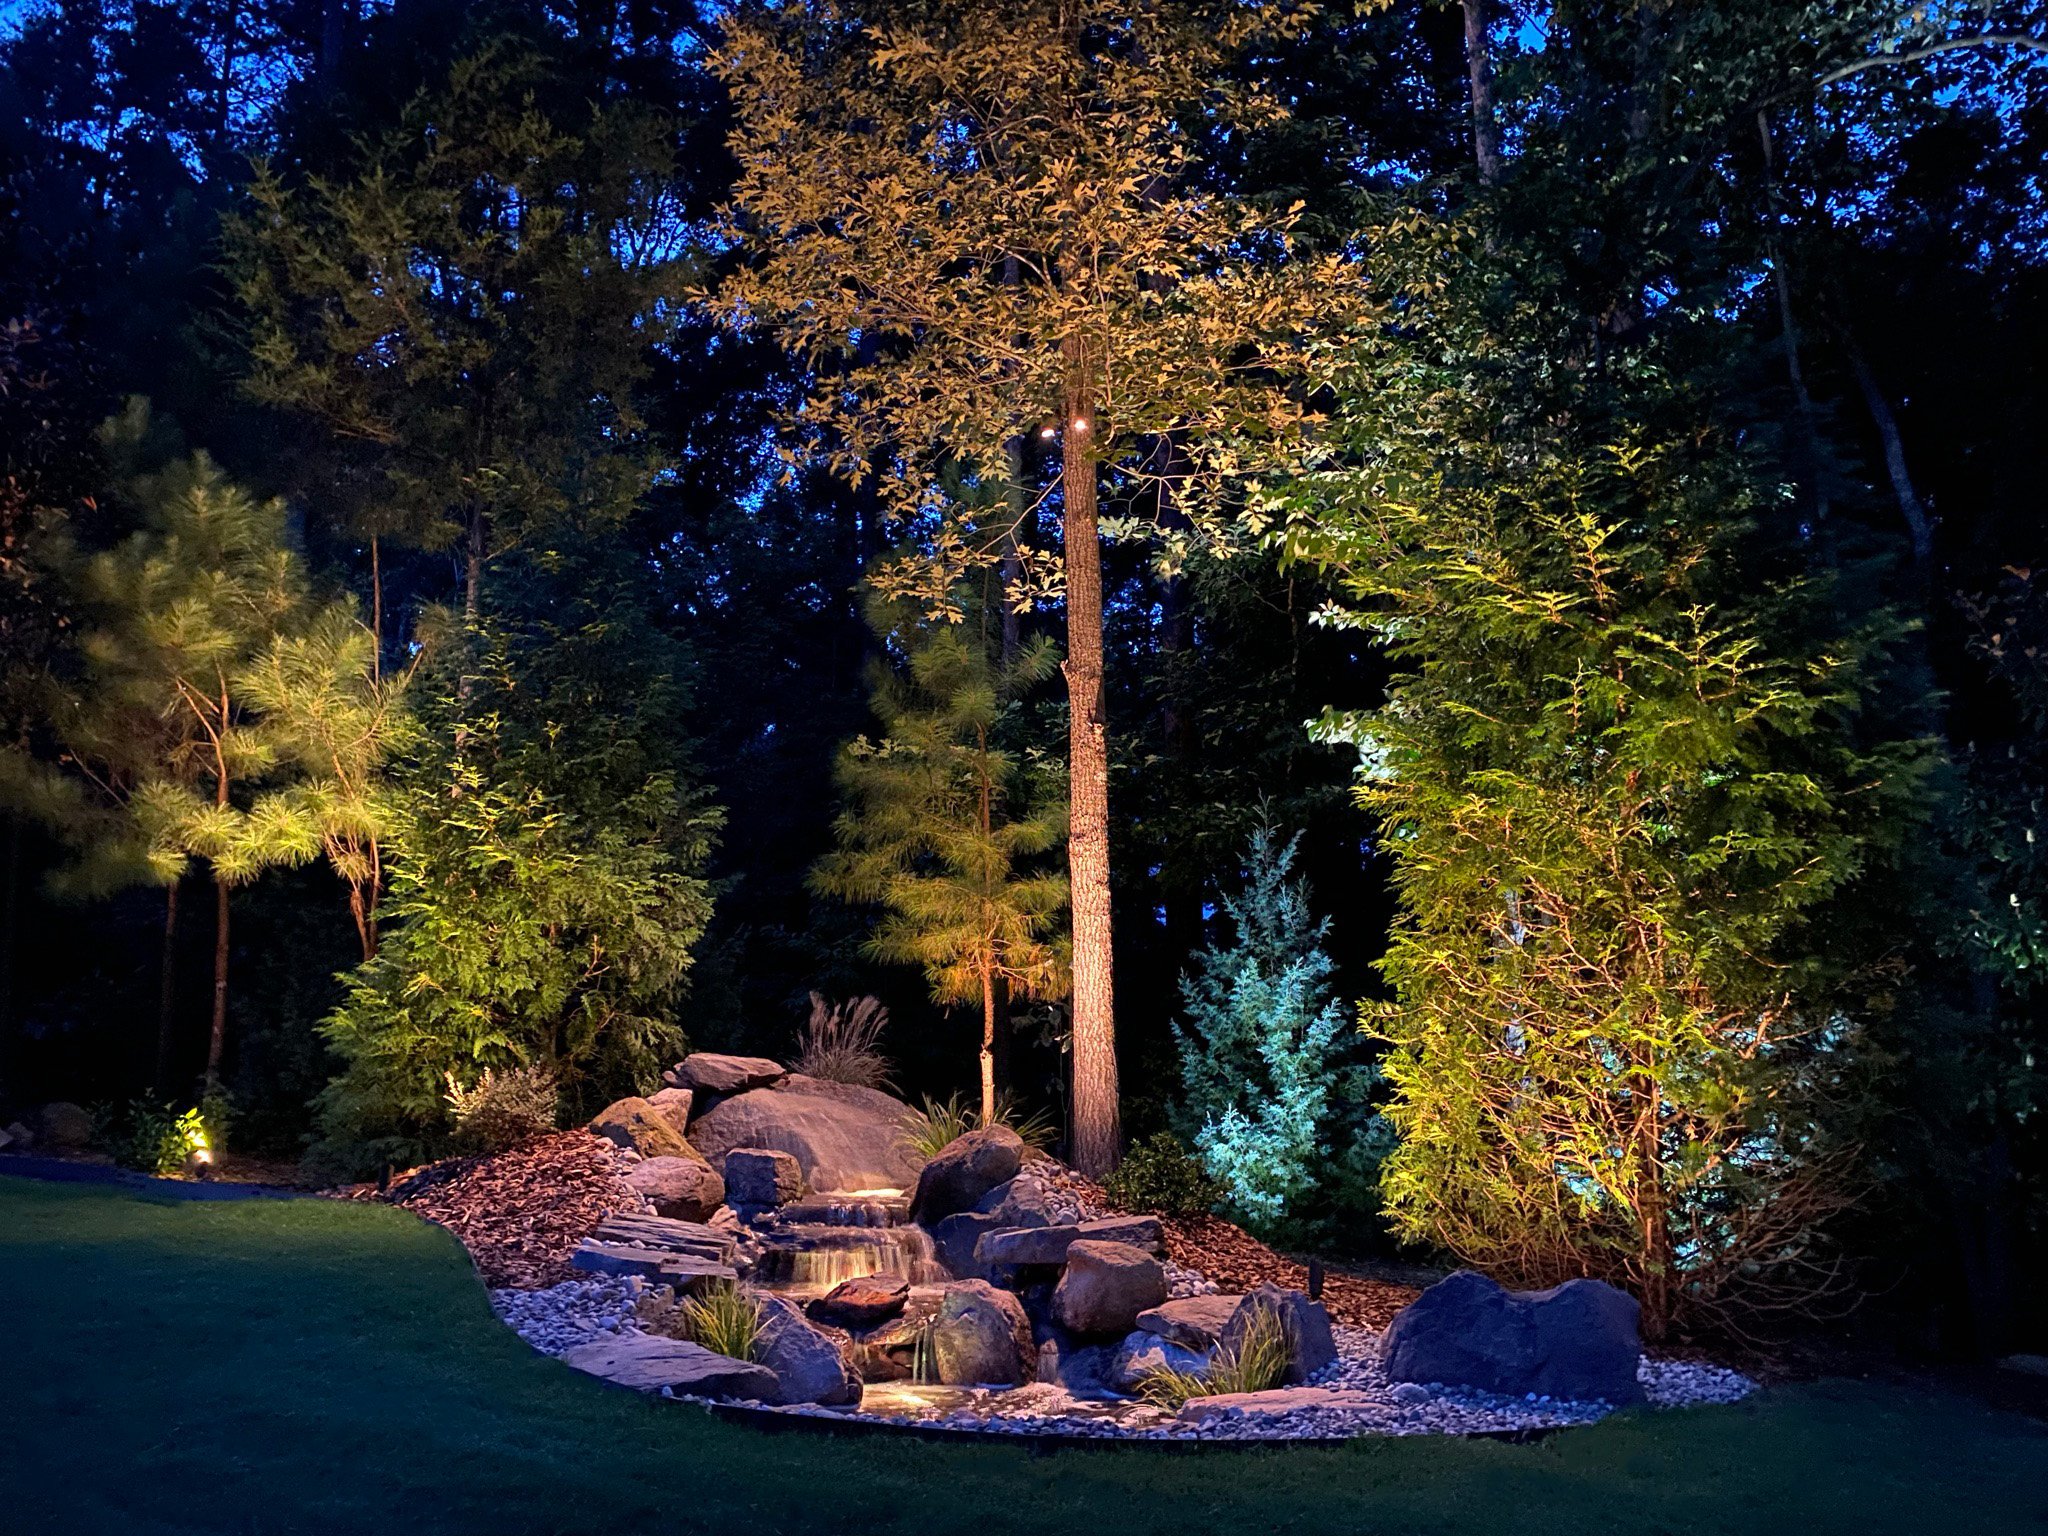  Water feature with a small waterfall surrounded by landscaping rocks is illuminated with underwater lights and down lighting. Surrounding trees are lit with tree accent lighting. 